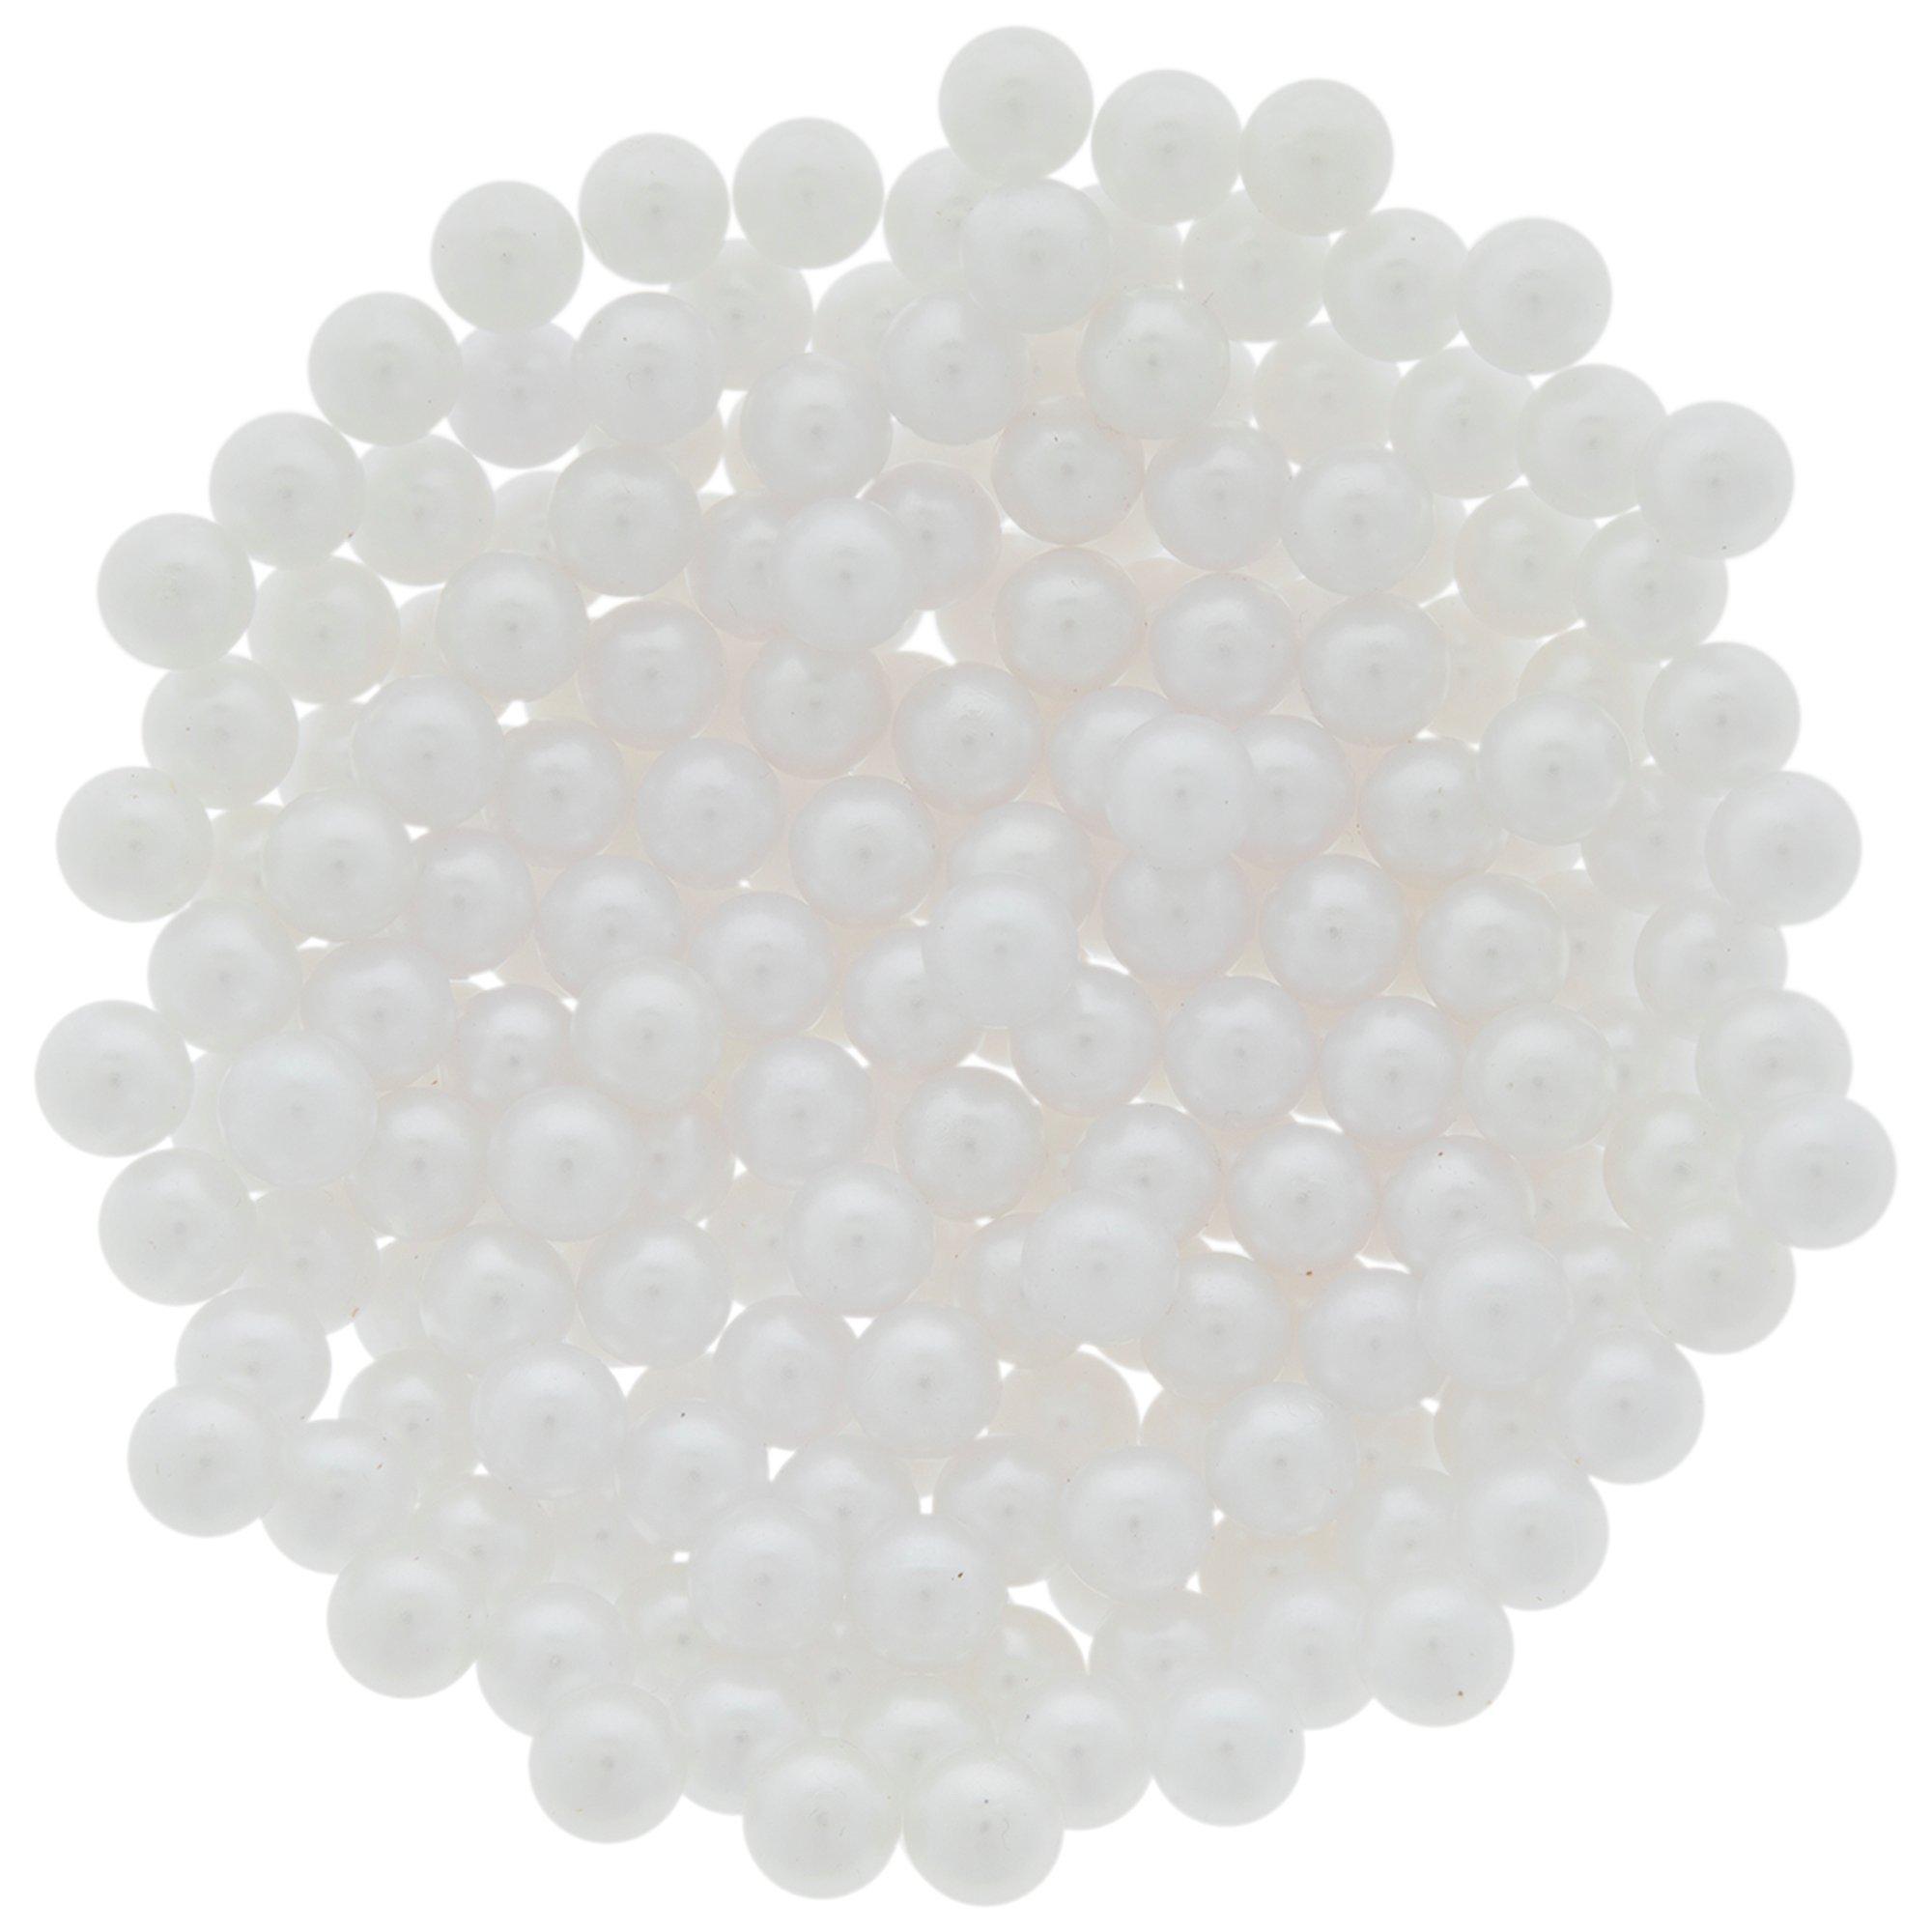 Generic 20pcs White/Golden / Beads Crafts For @ Best Price Online